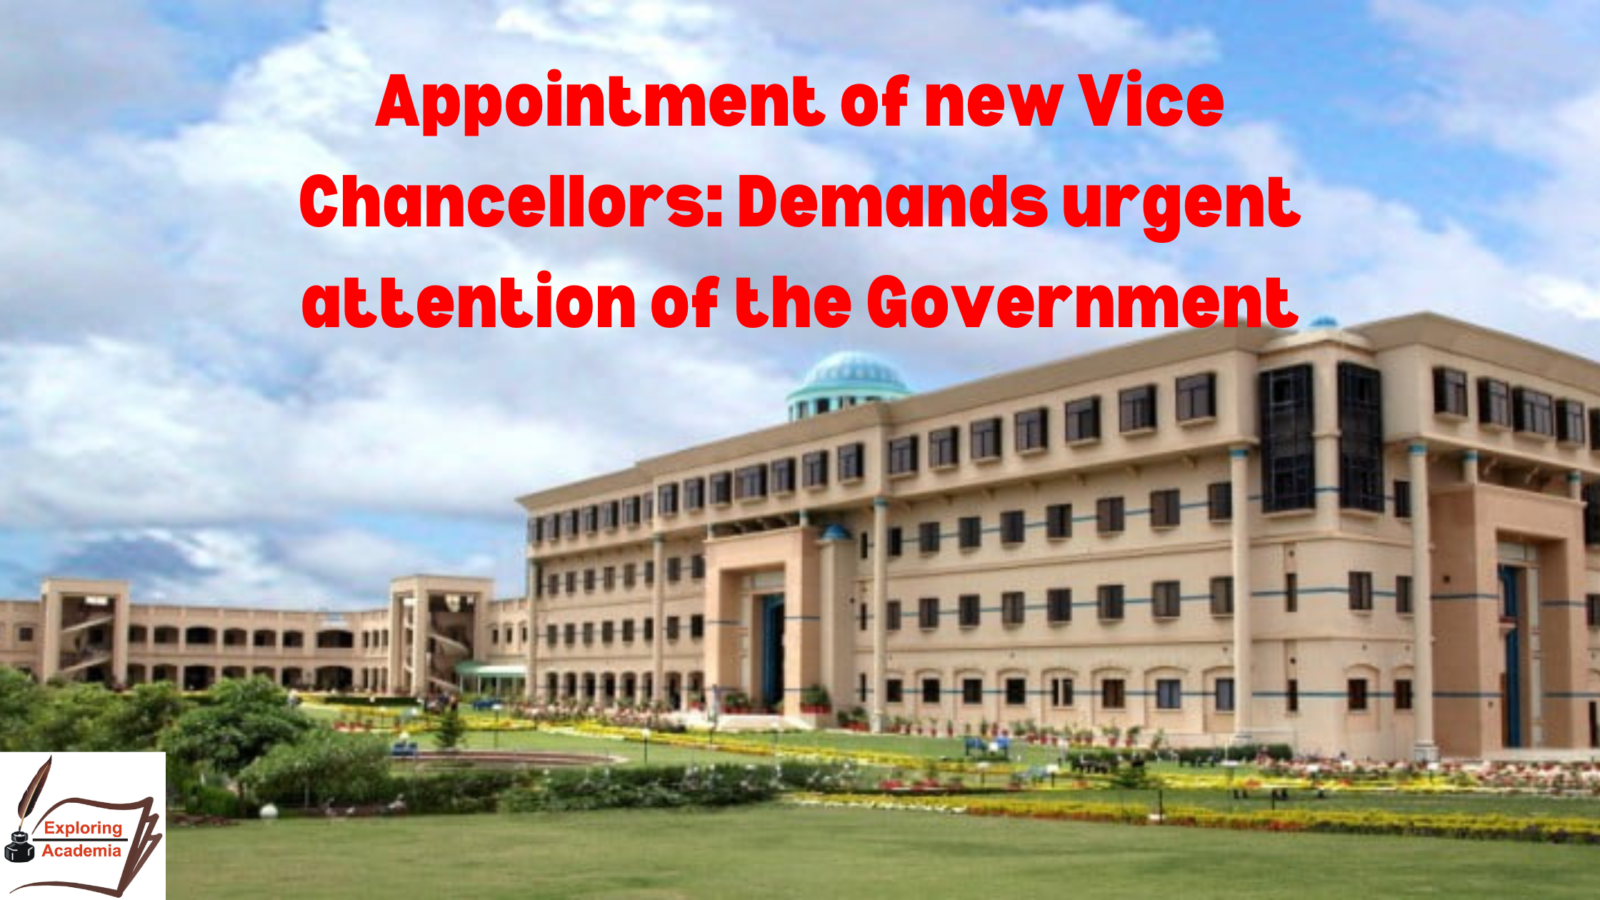 Appointment of new Vice Chancellors: Demand urgent attention of the Government in Pakistan